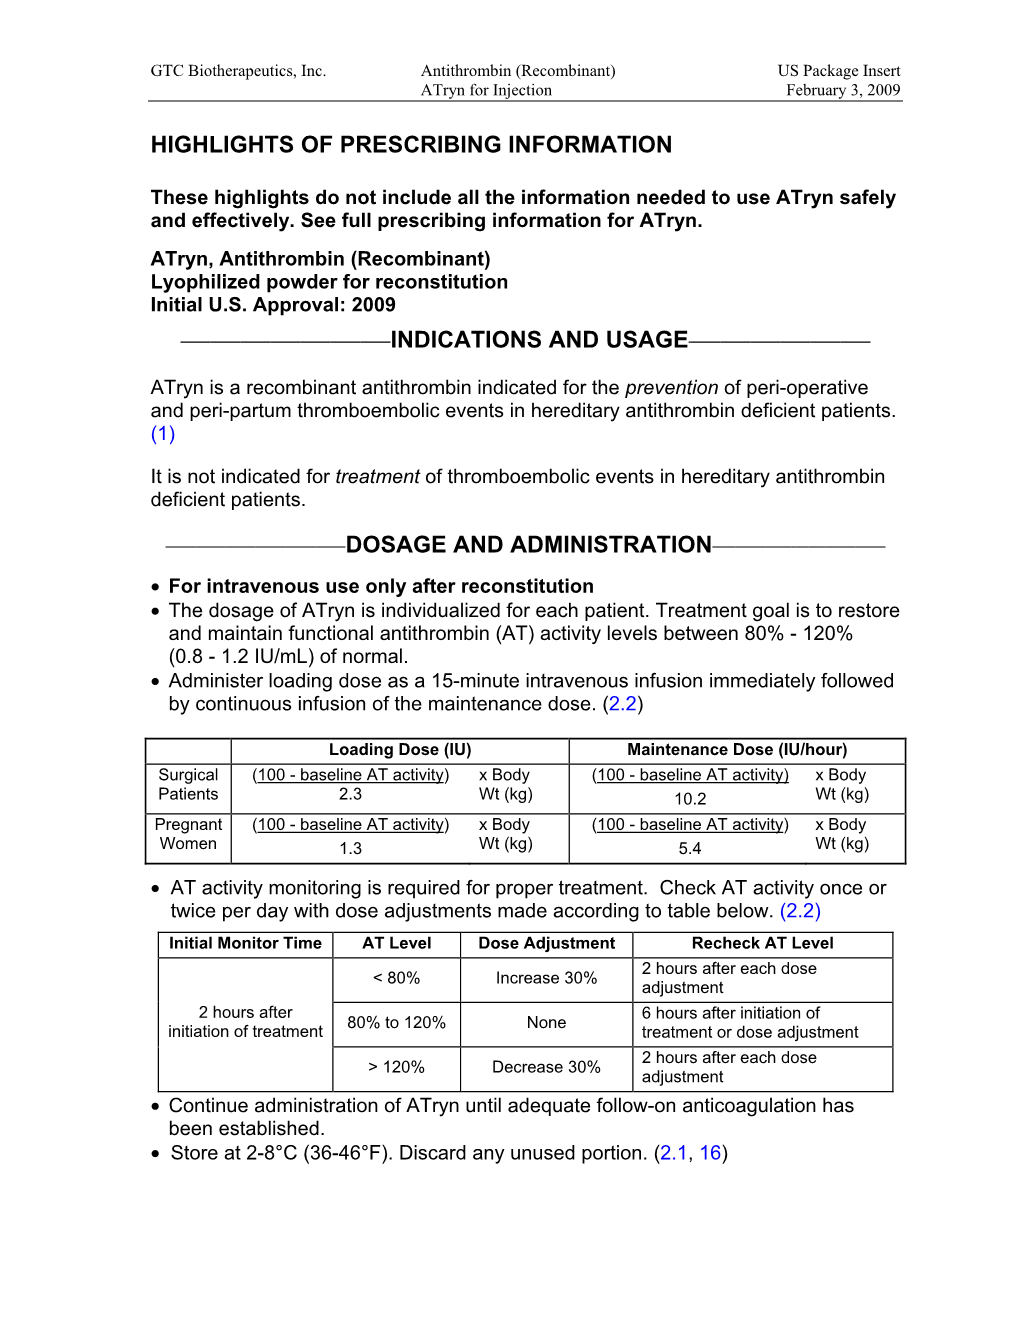 Package Insert Atryn for Injection February 3, 2009